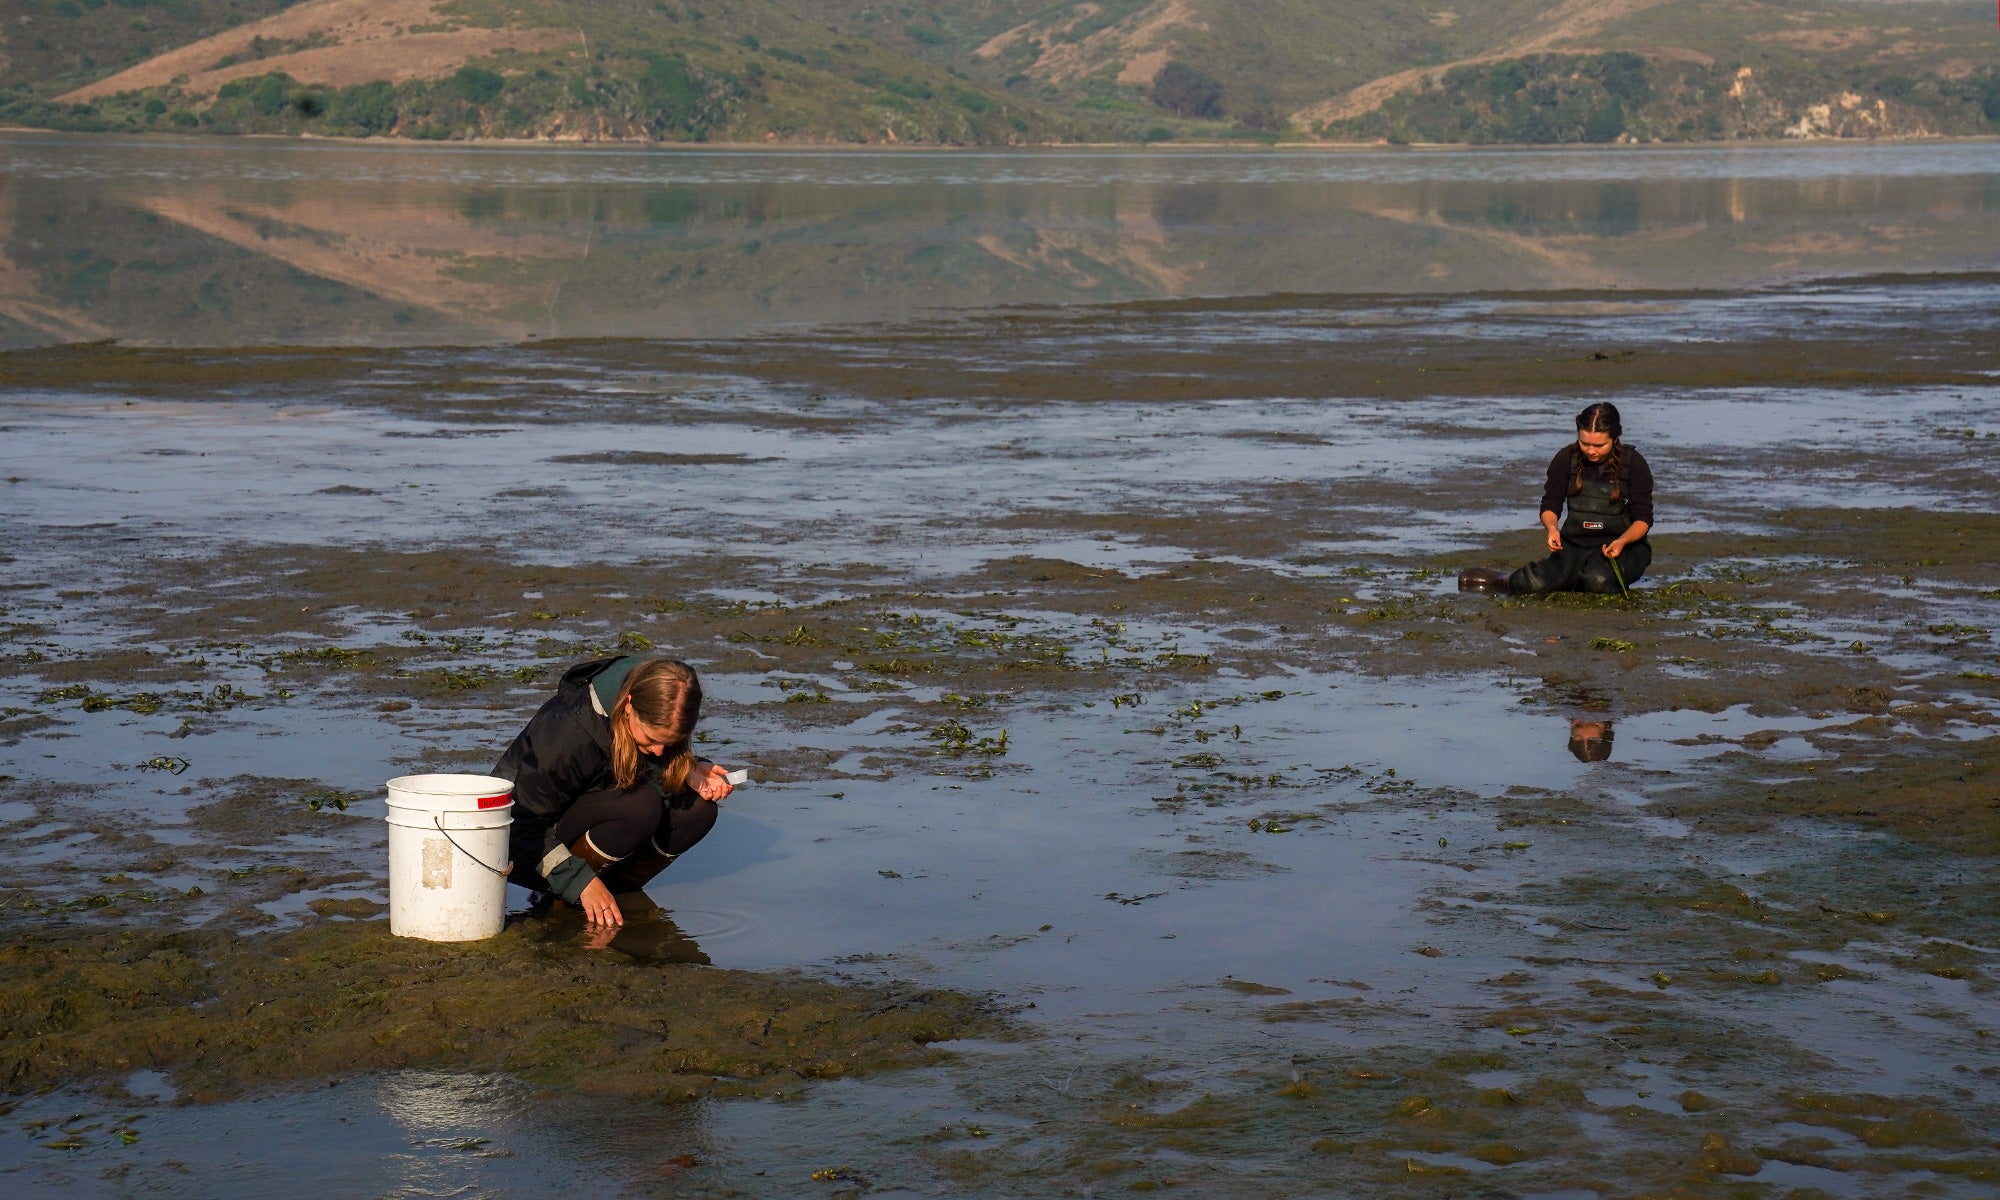 Undergraduates conduct their own research in Tomales Bay.